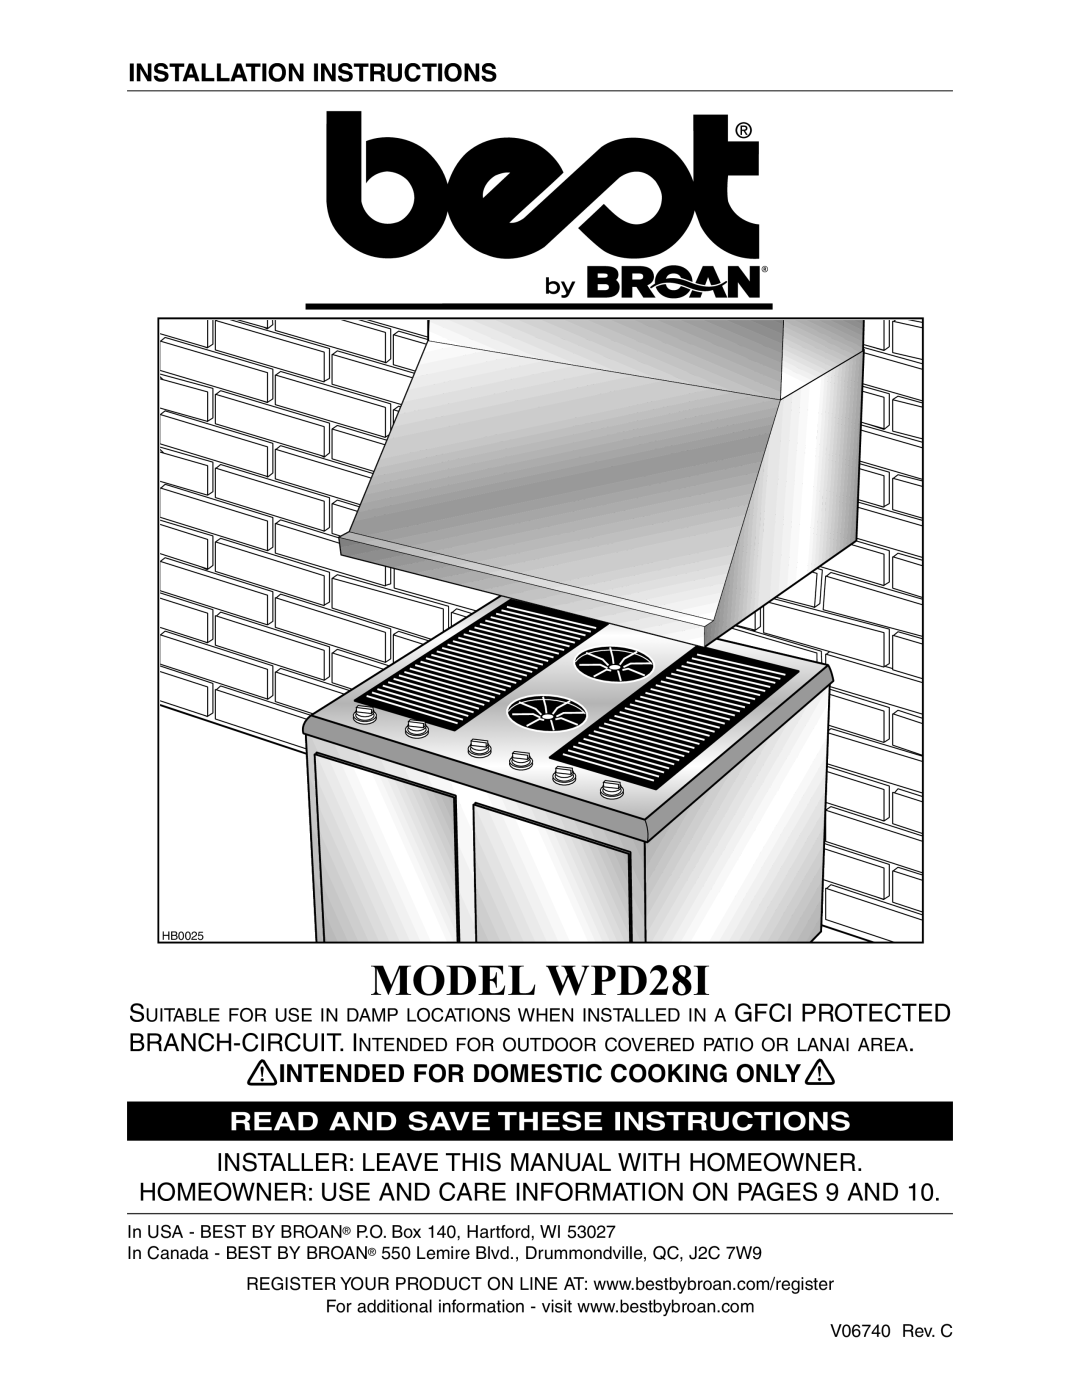 Best installation instructions MODEL WPD28I, Installation Instructions, Intended For Domestic Cooking Only 